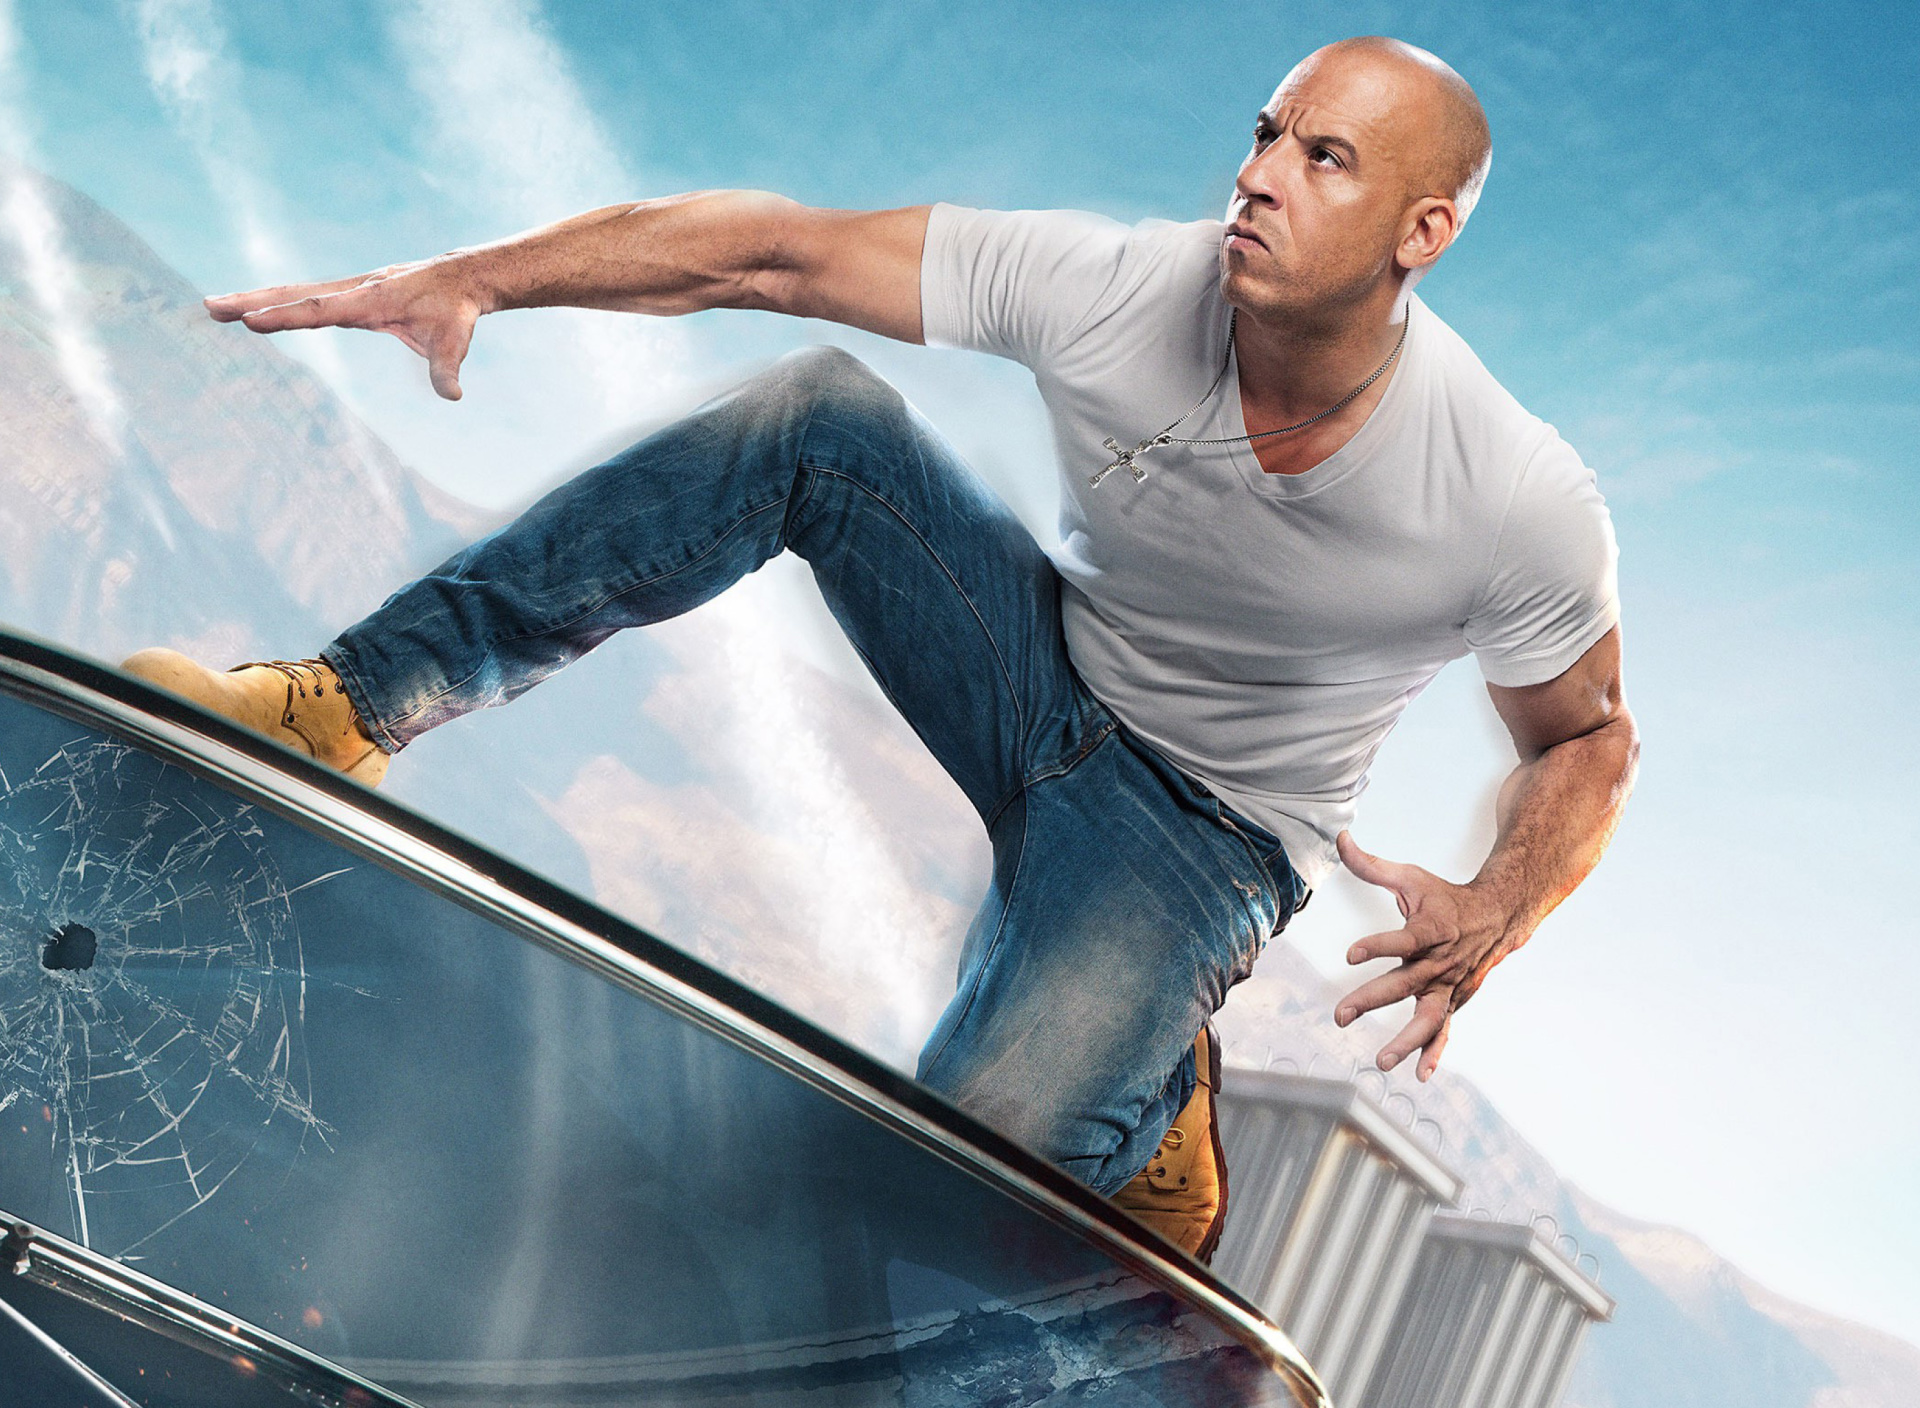 Fast & Furious Supercharged Poster with Vin Diesel screenshot #1 1920x1408